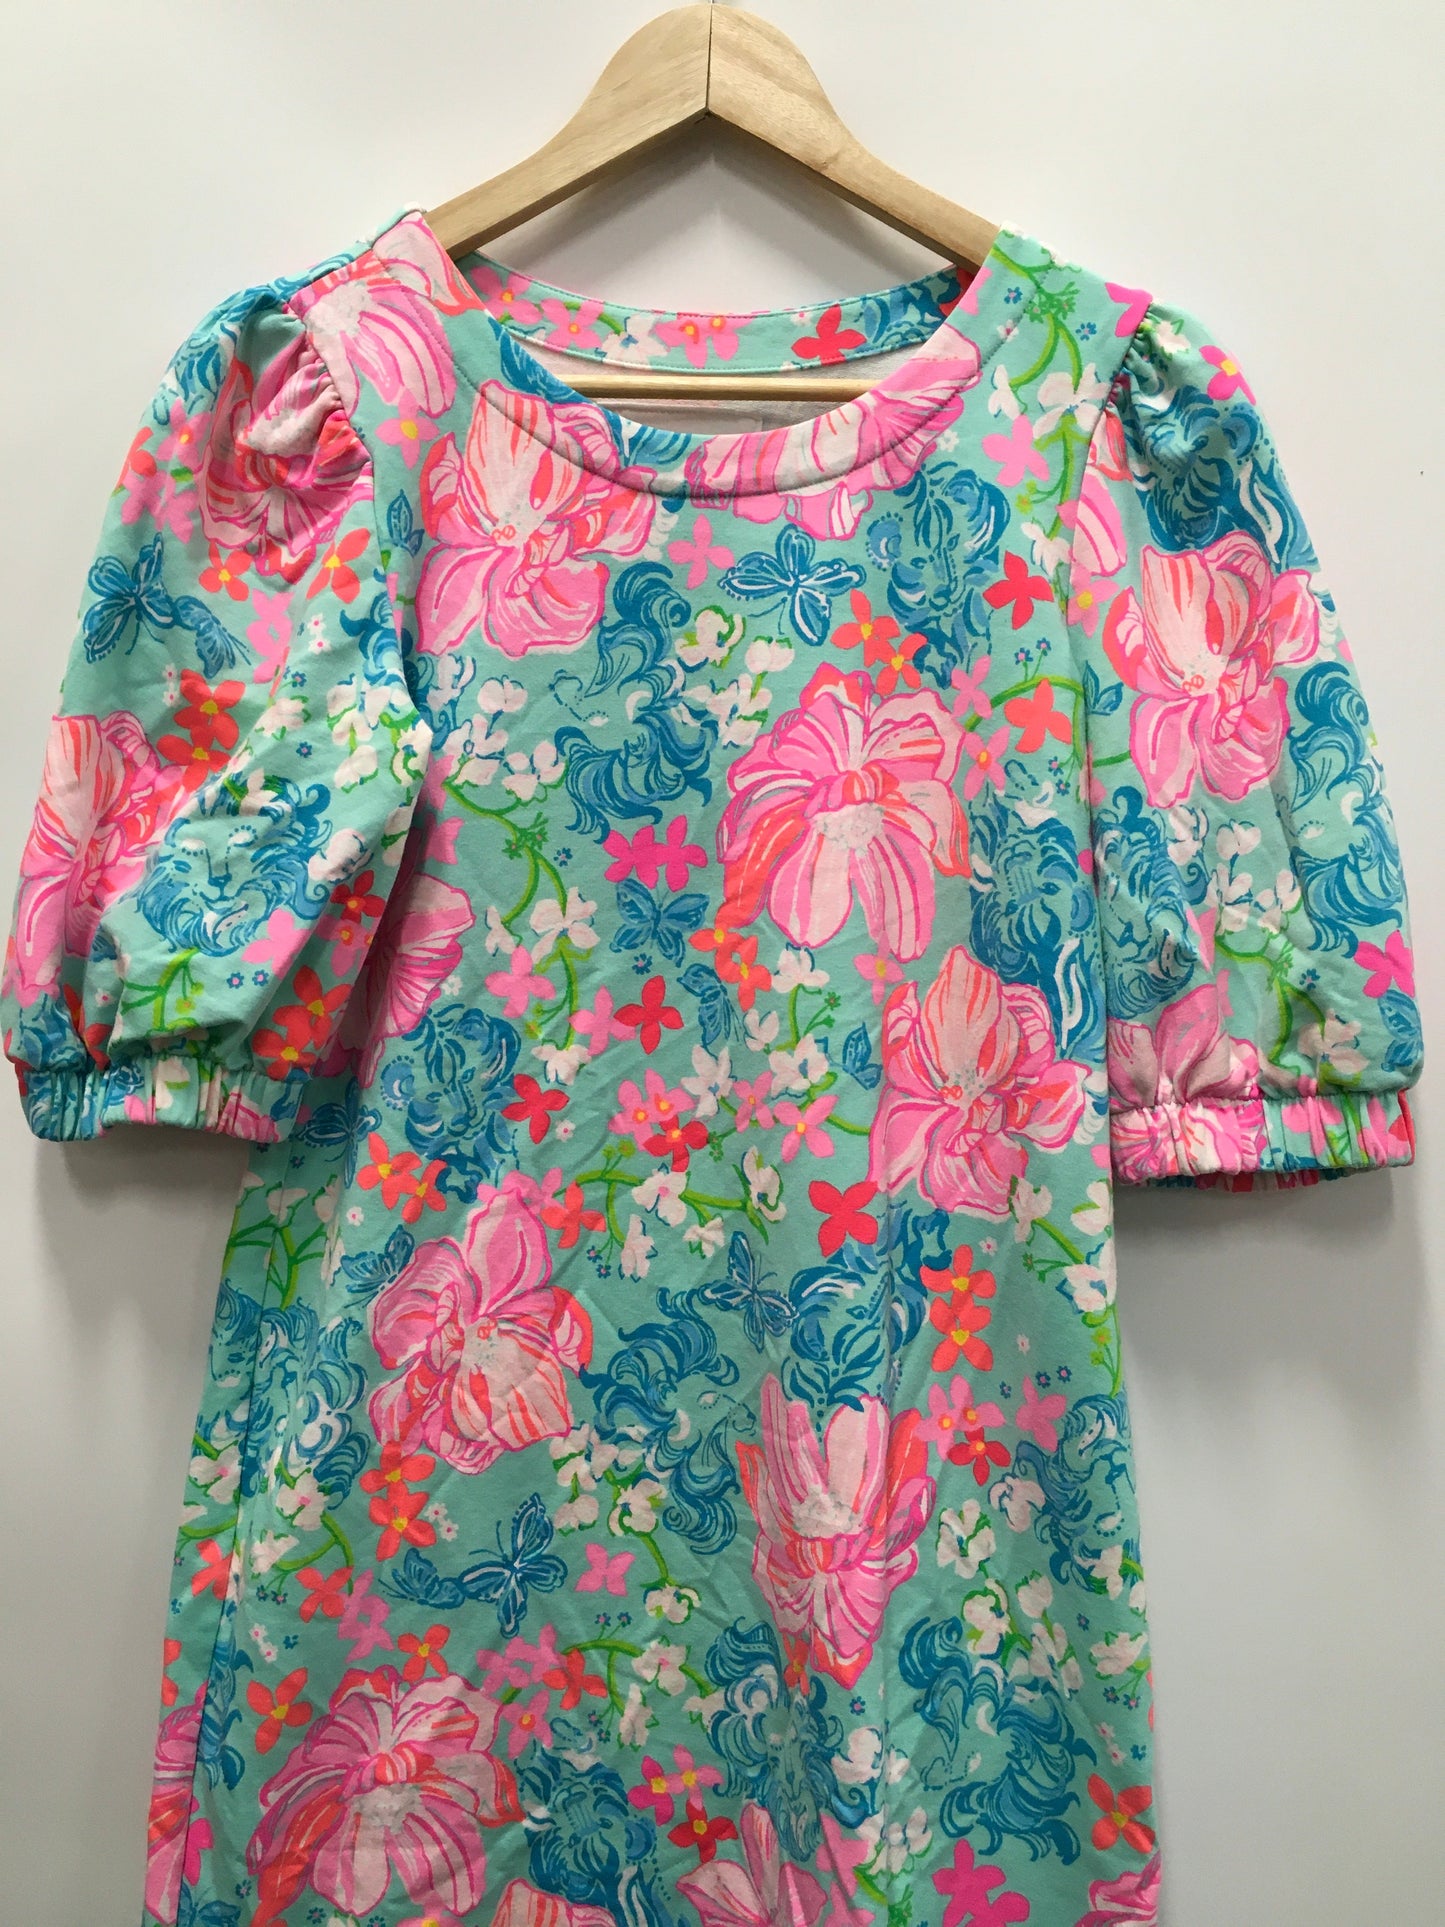 Dress Casual Short By Lilly Pulitzer  Size: S